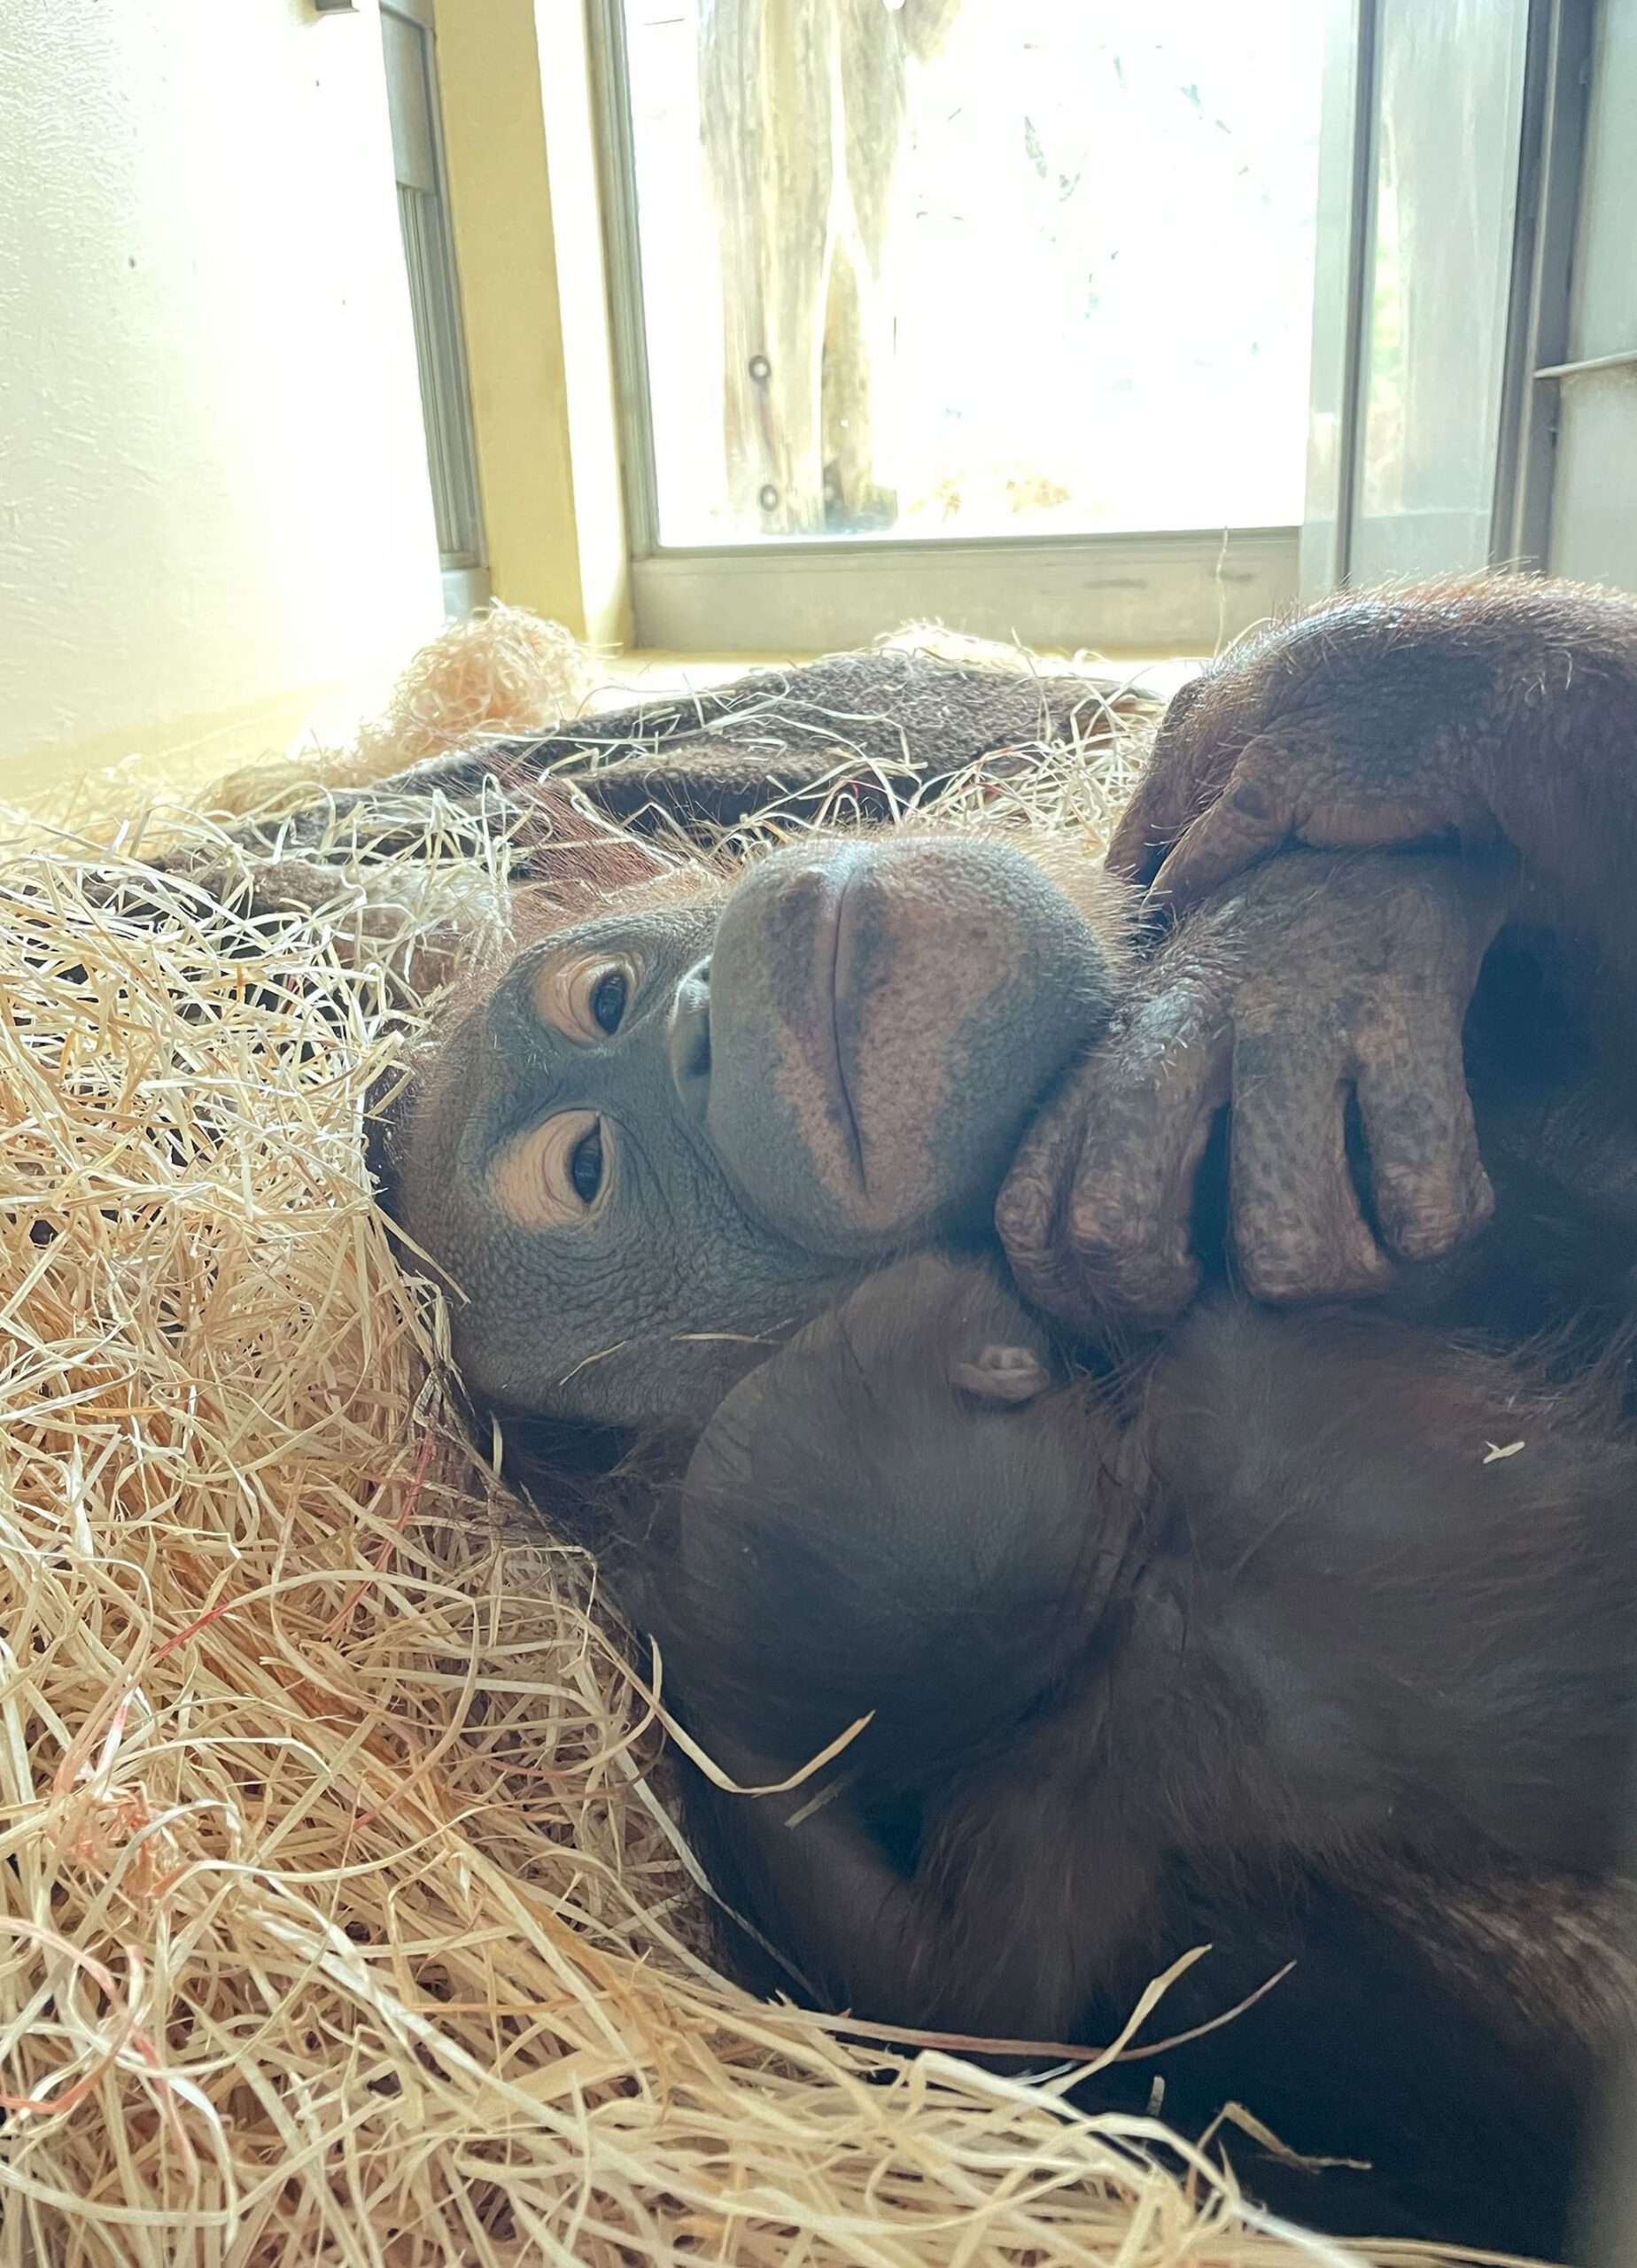 Read more about the article Critically Endangered Orangutan Only Hours Old Holds Mum At World’s Oldest Zoo